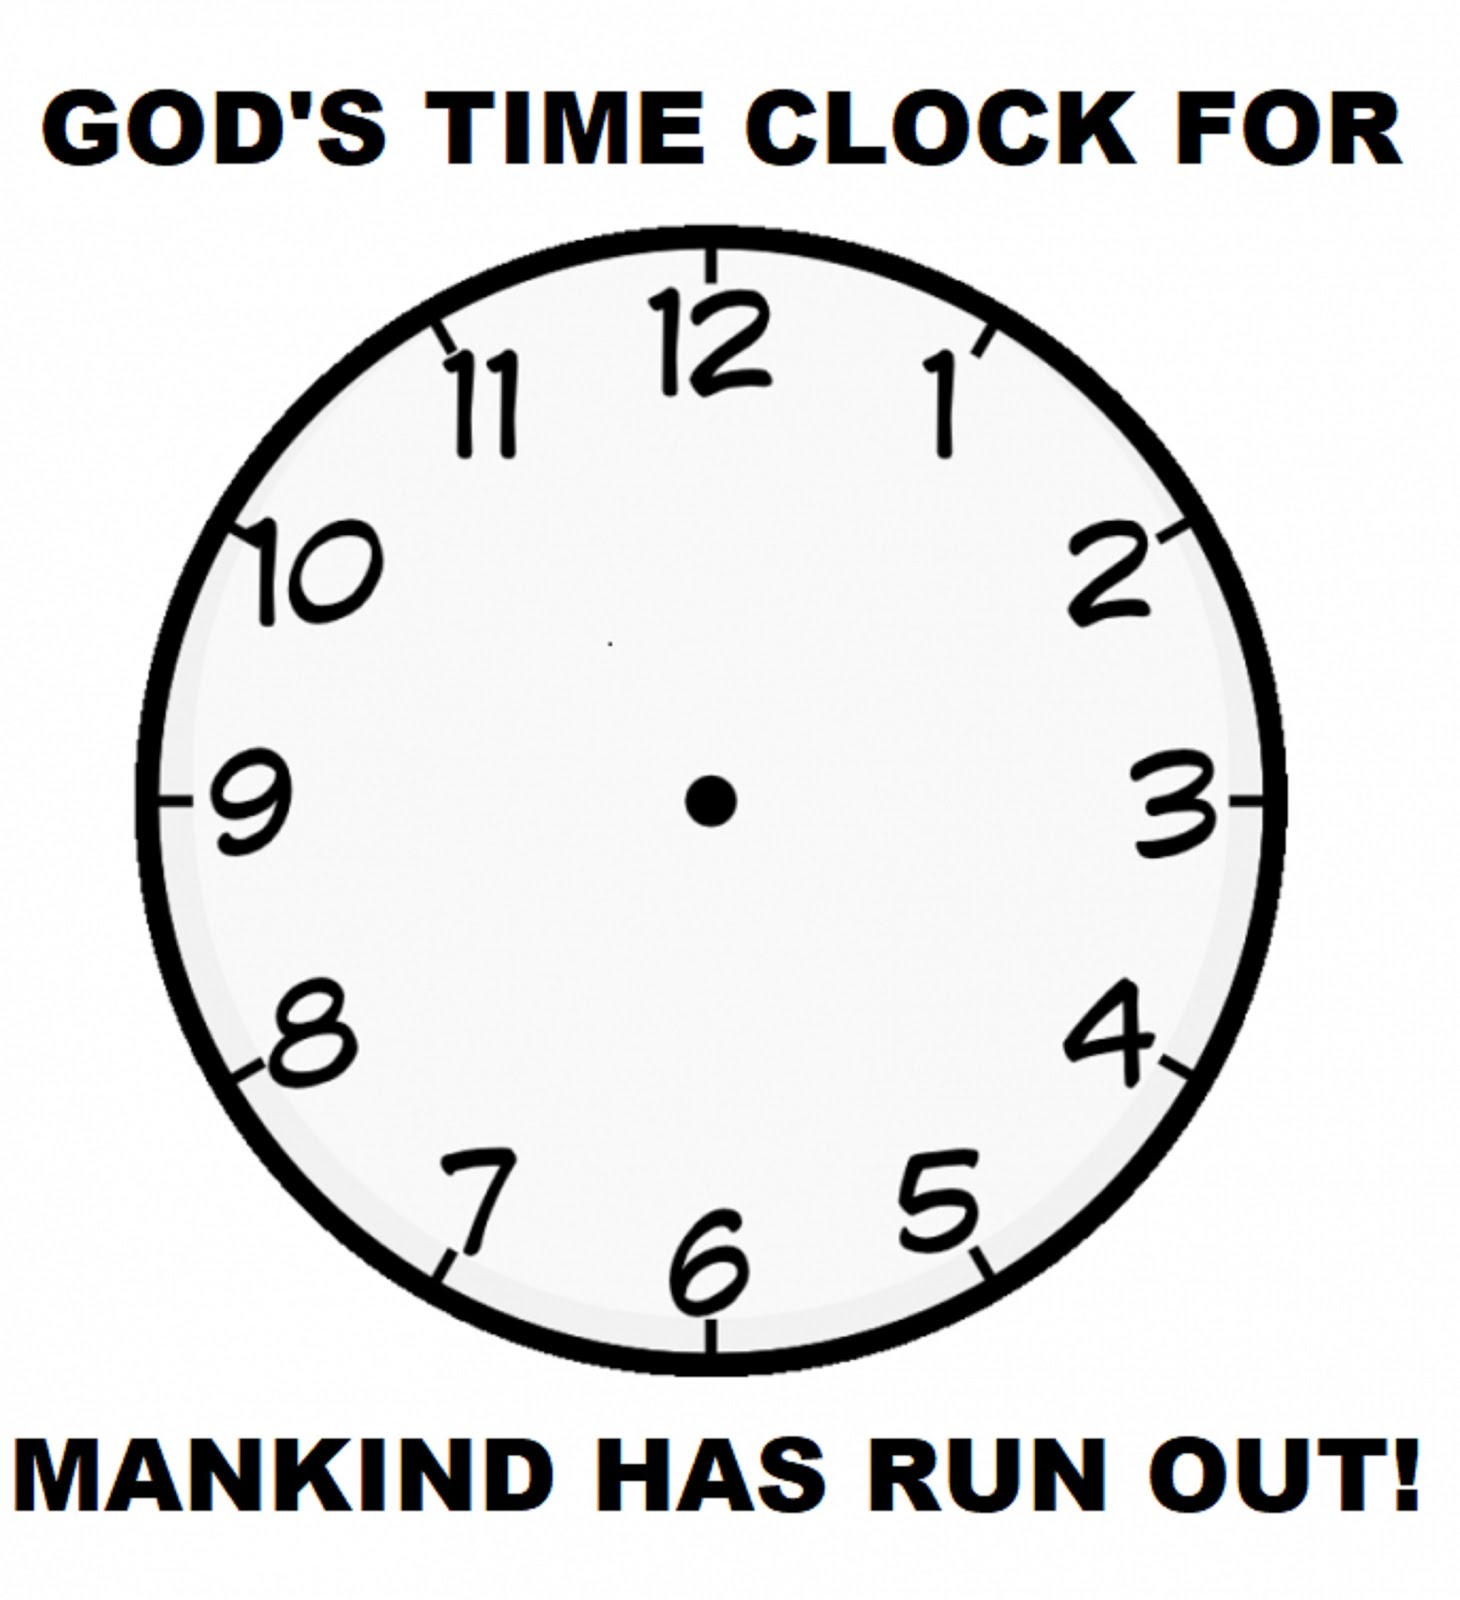 GOD'S TIME CLOCK FOR MANKIND HAS RUN OUT